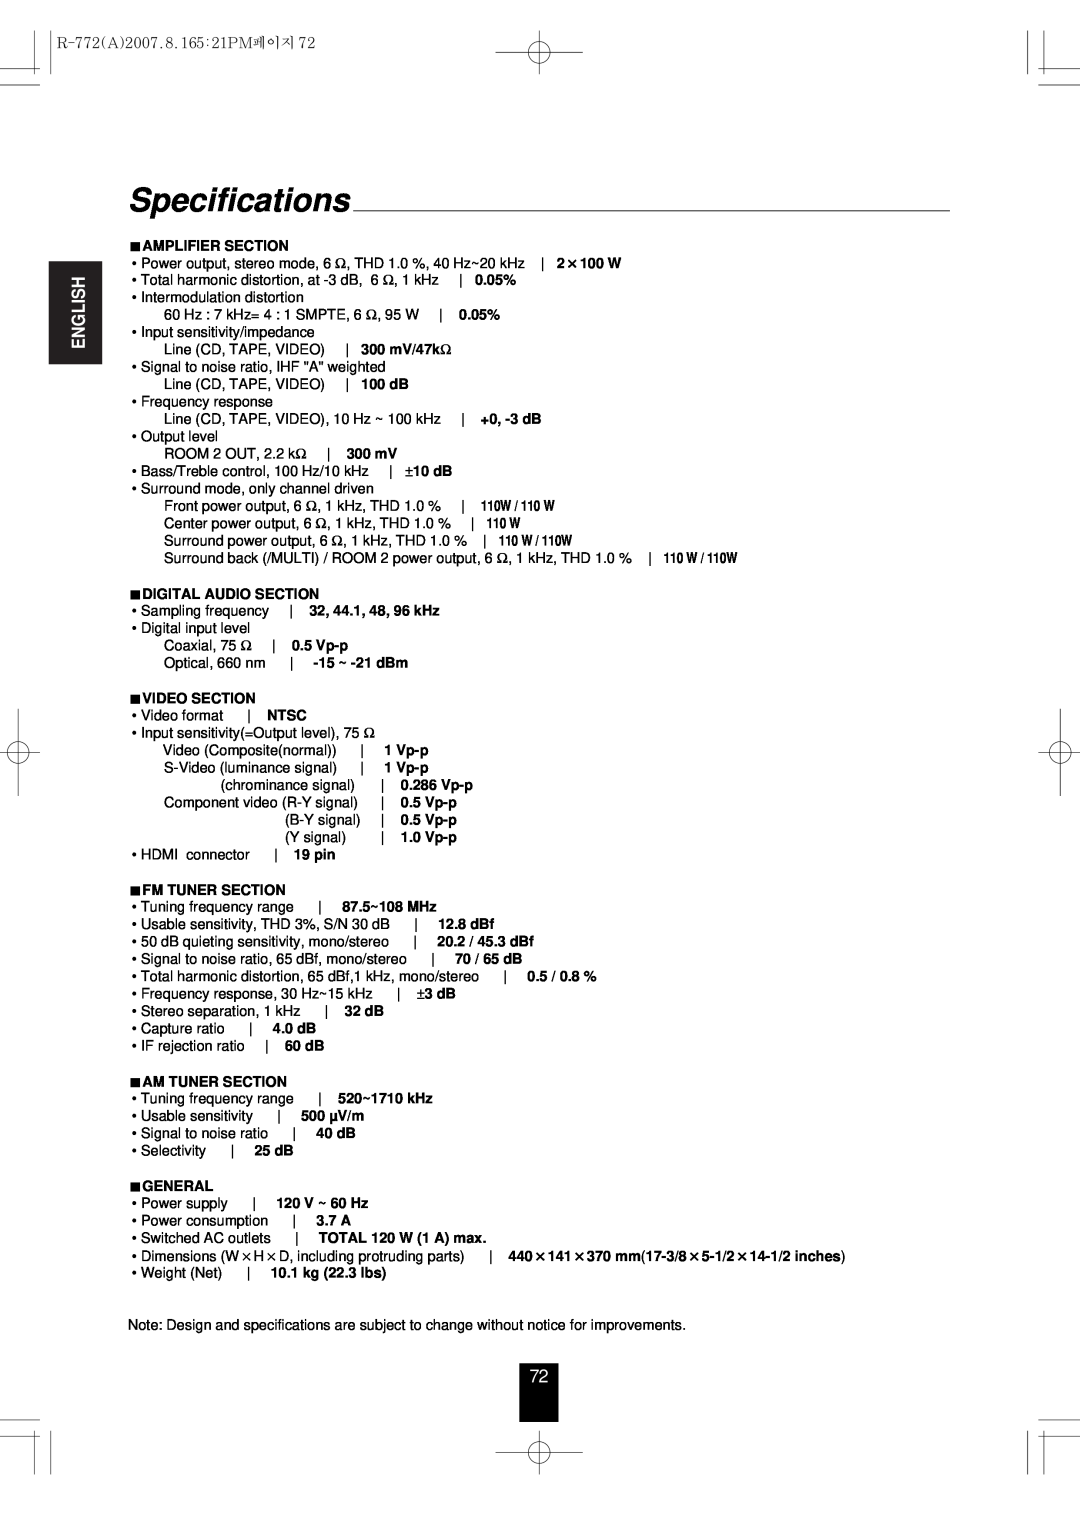 Sherwood R-772 manual Specifications, English 